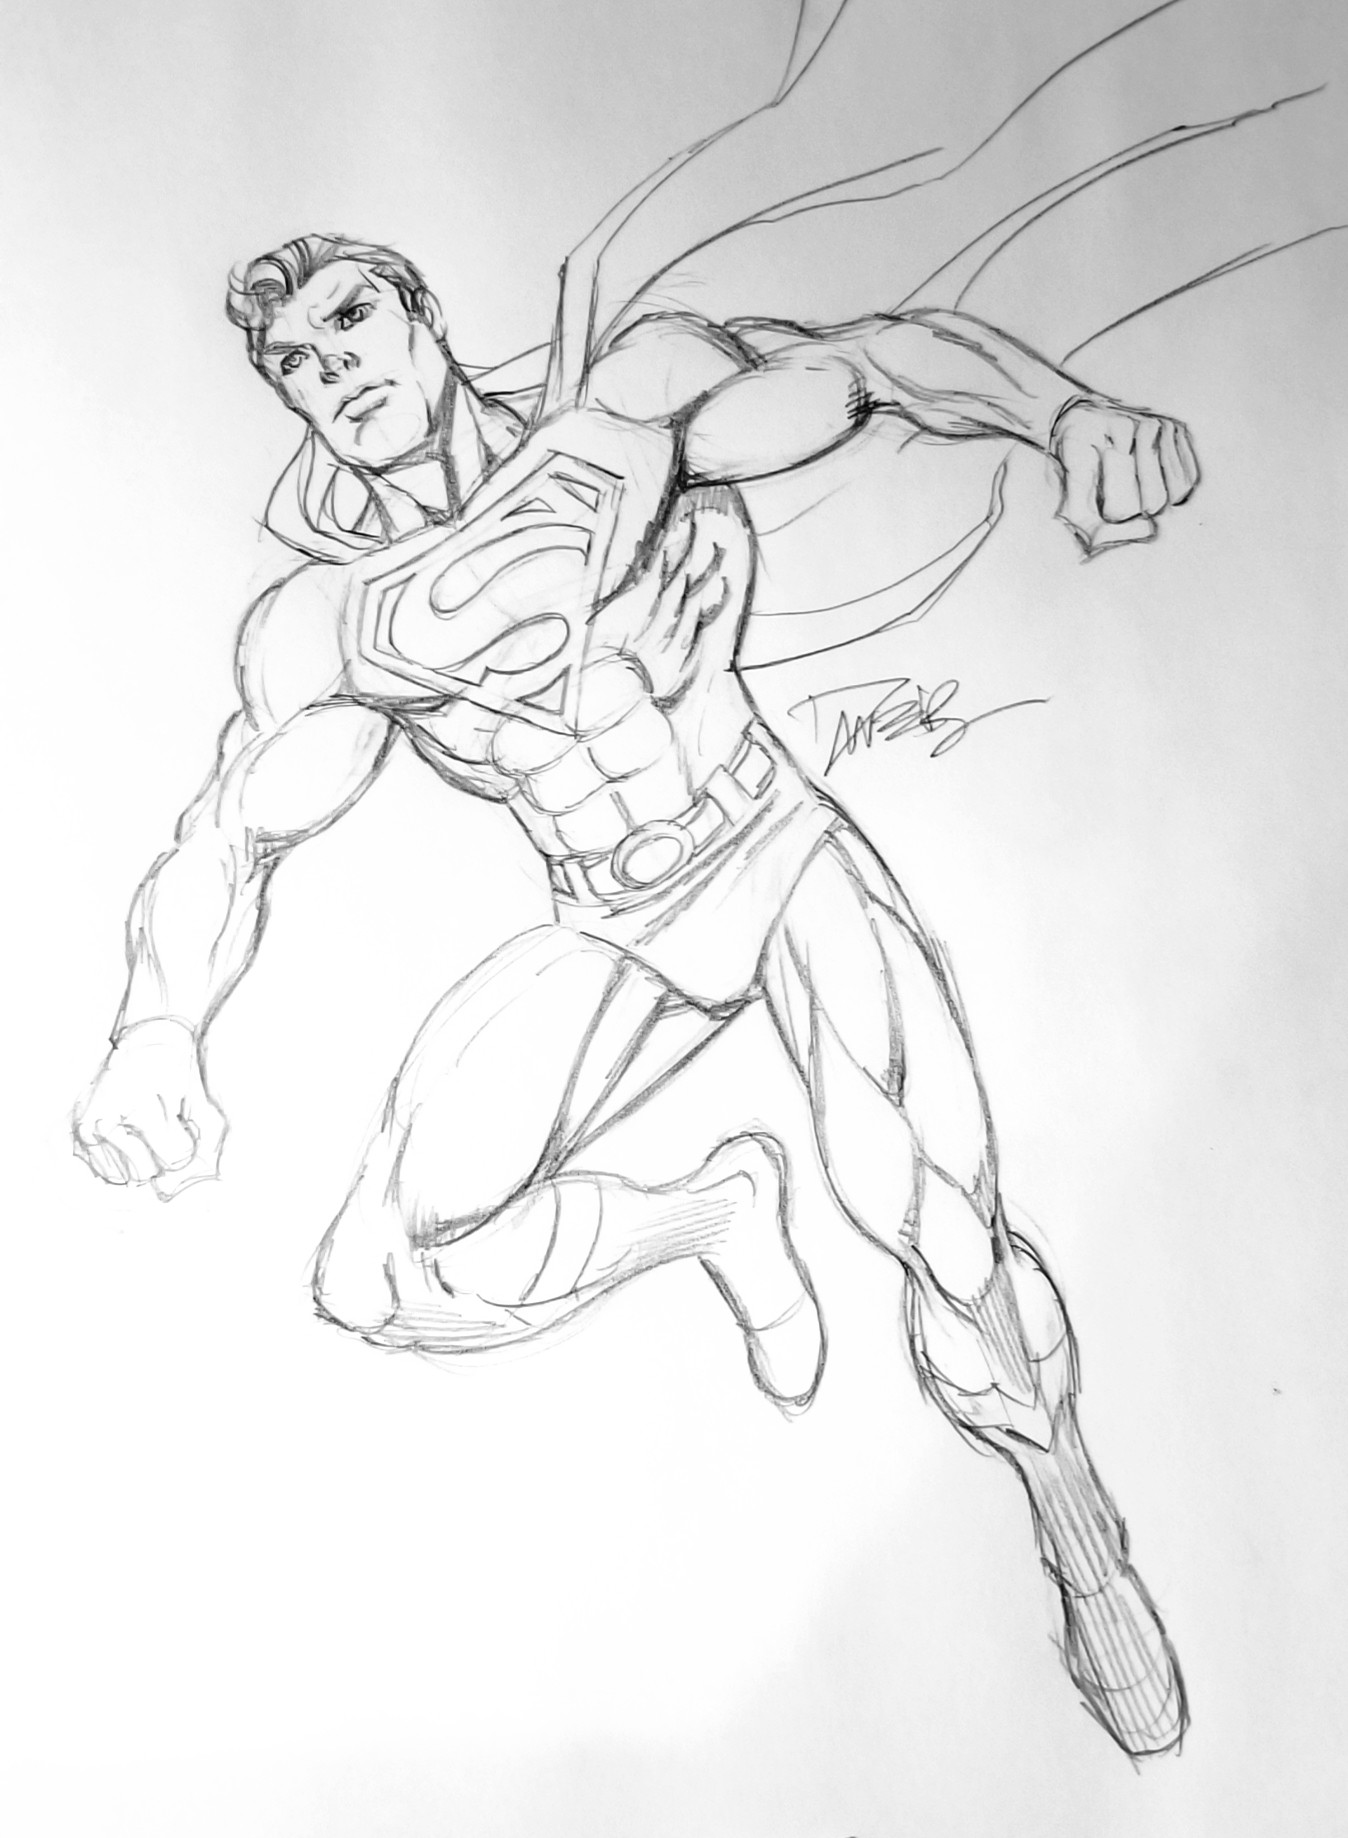 How to Draw Superheroes - Male Proportions | Robert Marzullo | Skillshare